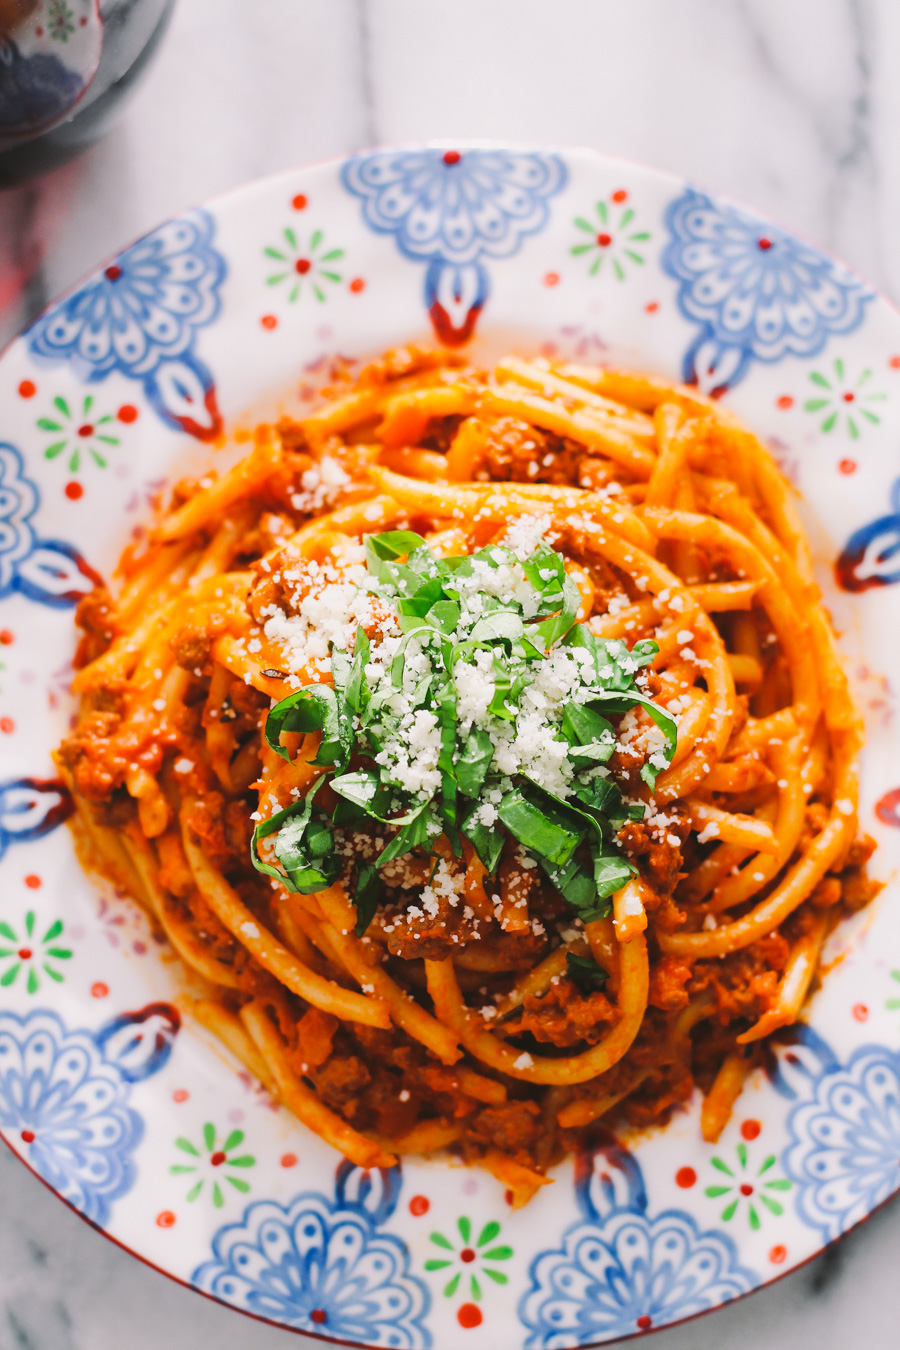 Turkey bolognese tossed with bucatini is served atop a patterned plate. The pasta is garnished with grated parmesan cheese and fresh sliced basil.